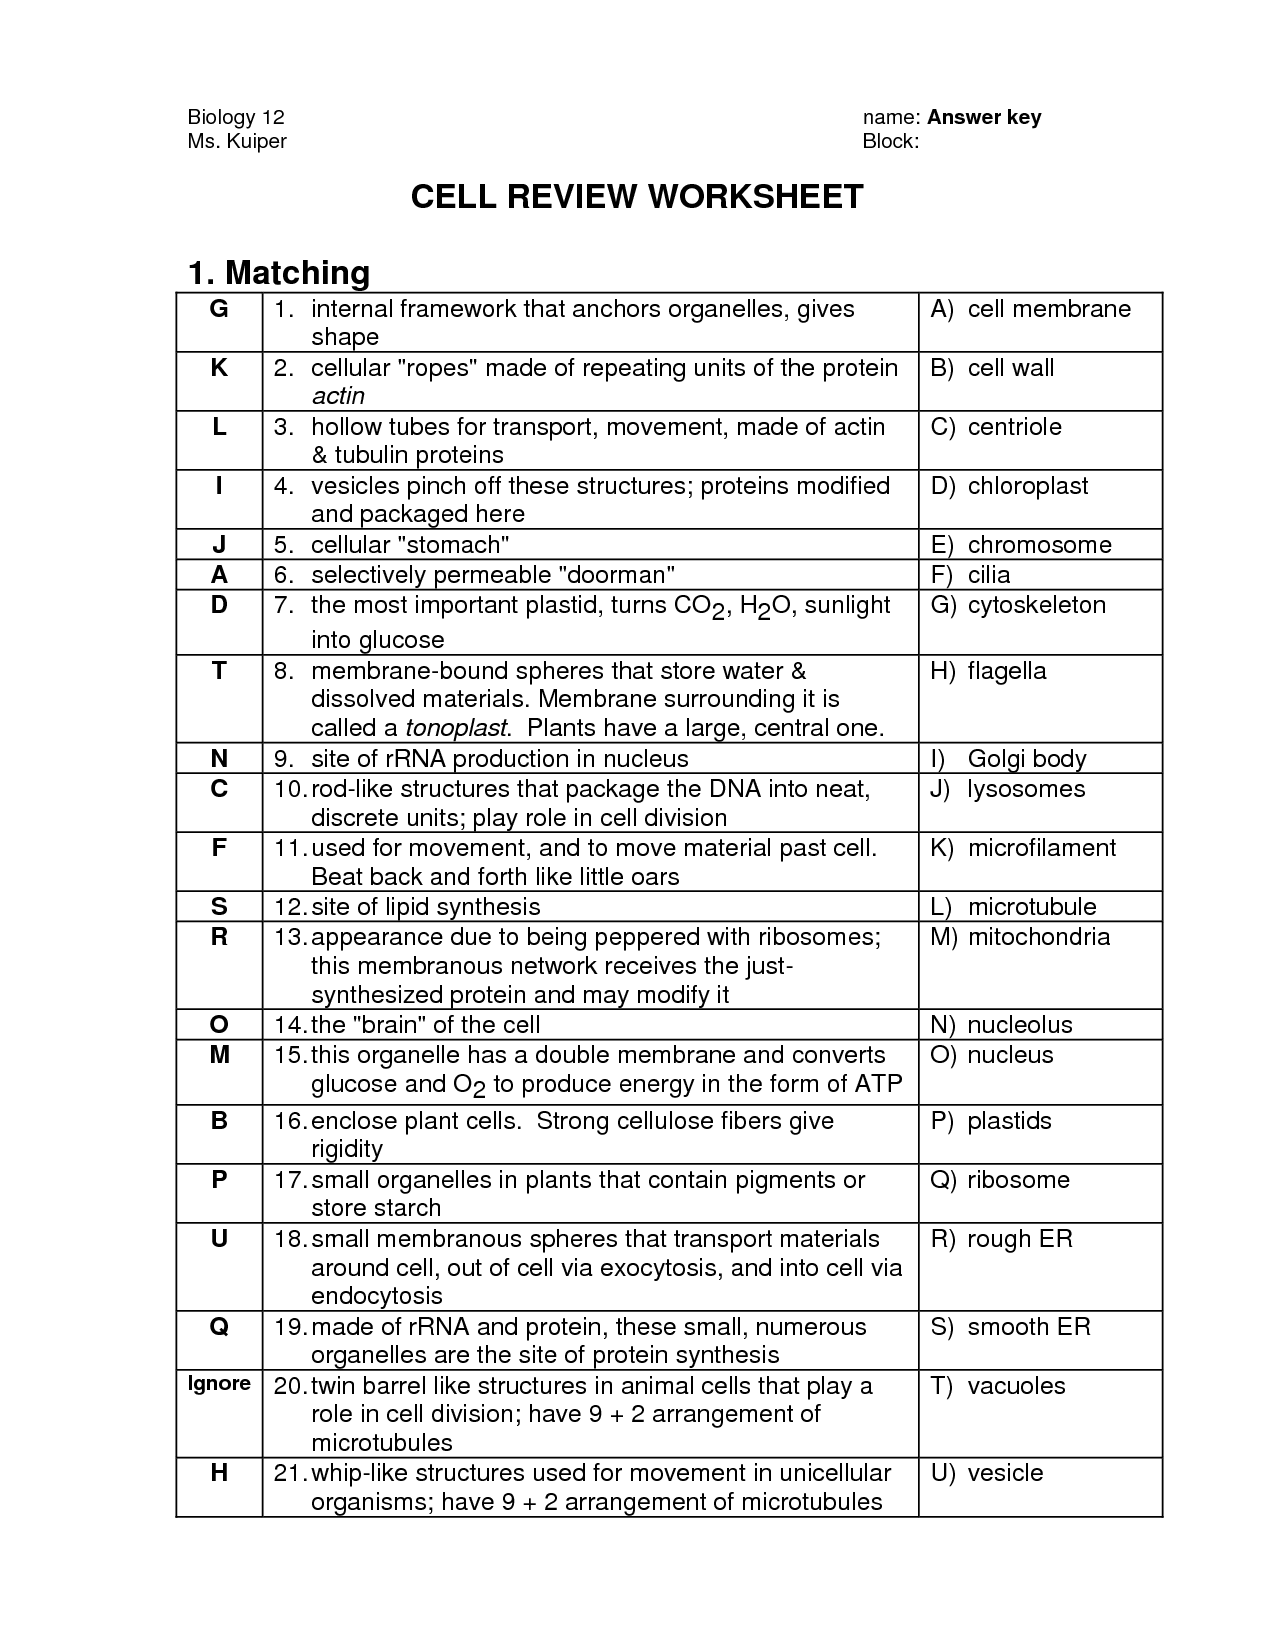 16-best-images-of-the-12-cell-review-worksheet-answers-biology-cell-organelles-worksheet